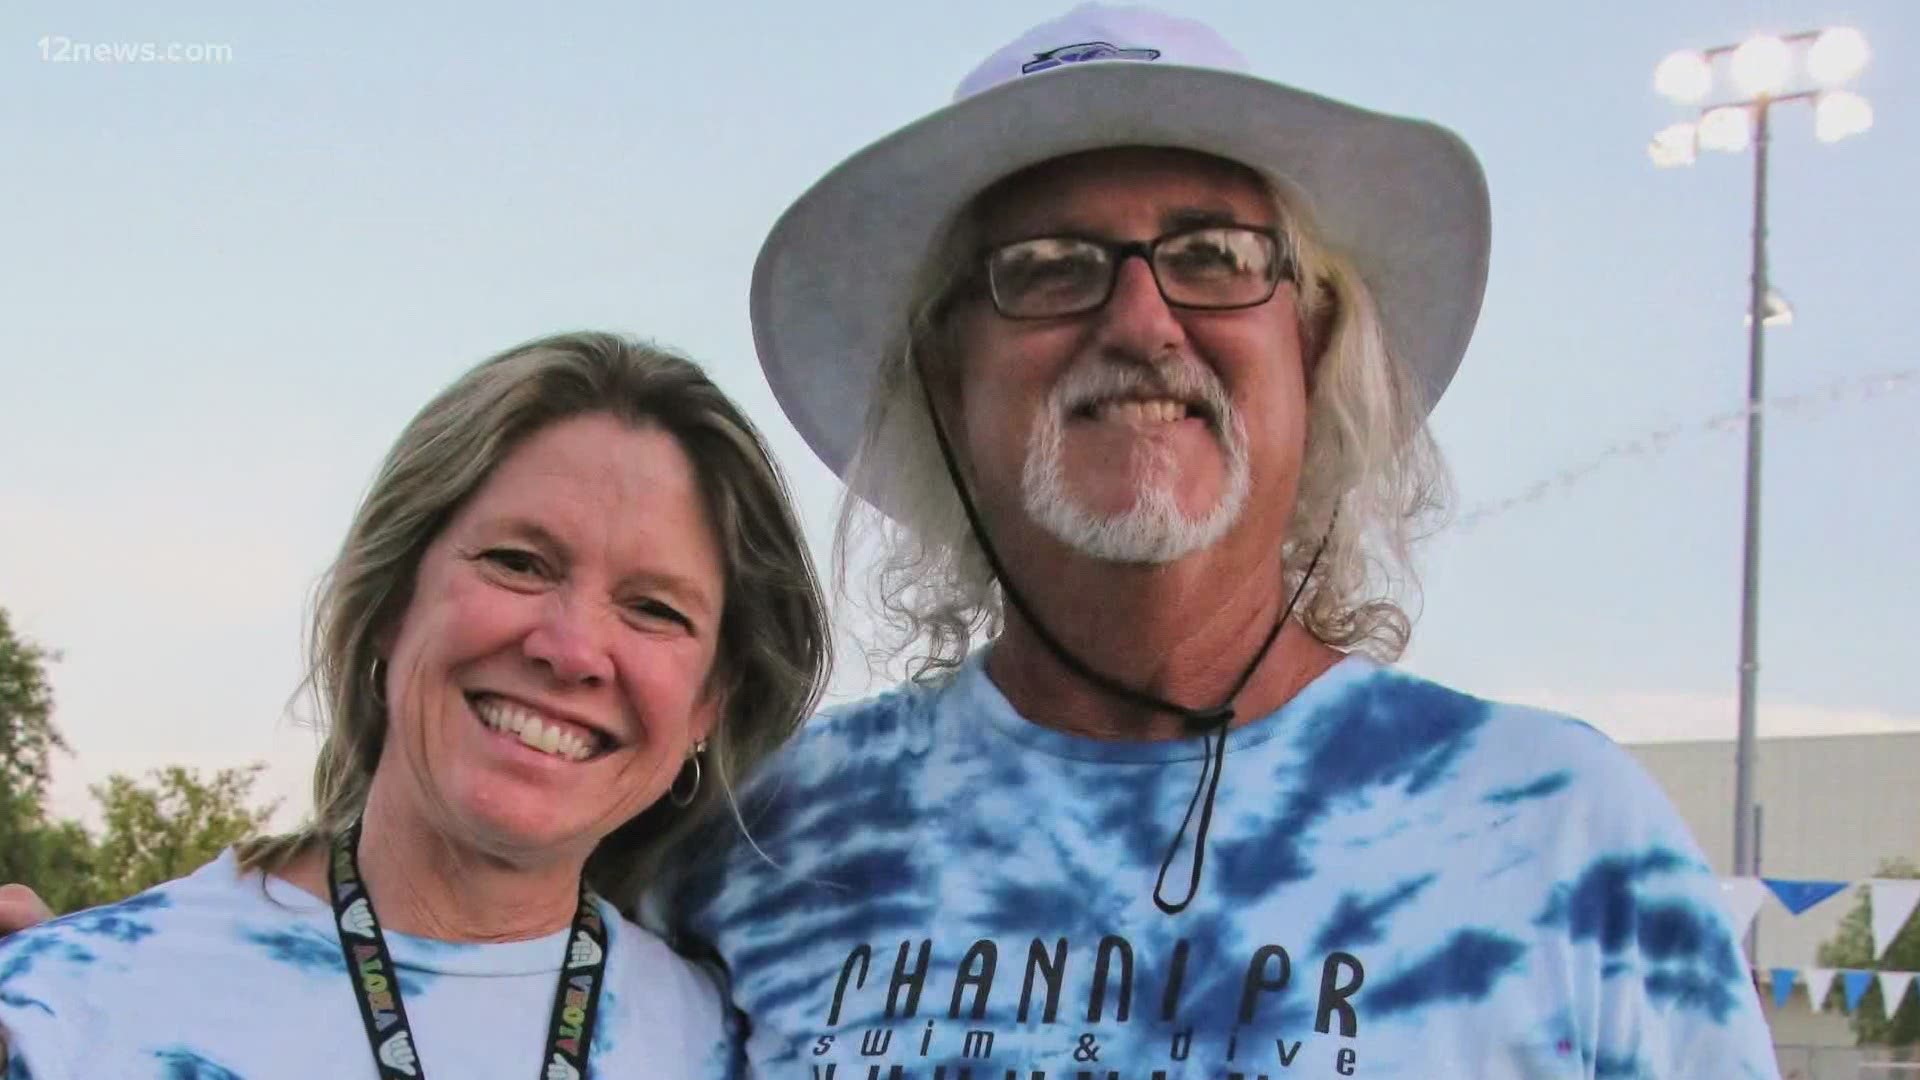 Kerry Crosswhite was a legend on Chandler High School's campus and always there for his students and athletes. He lost his battle with COVID-19 on Tuesday.